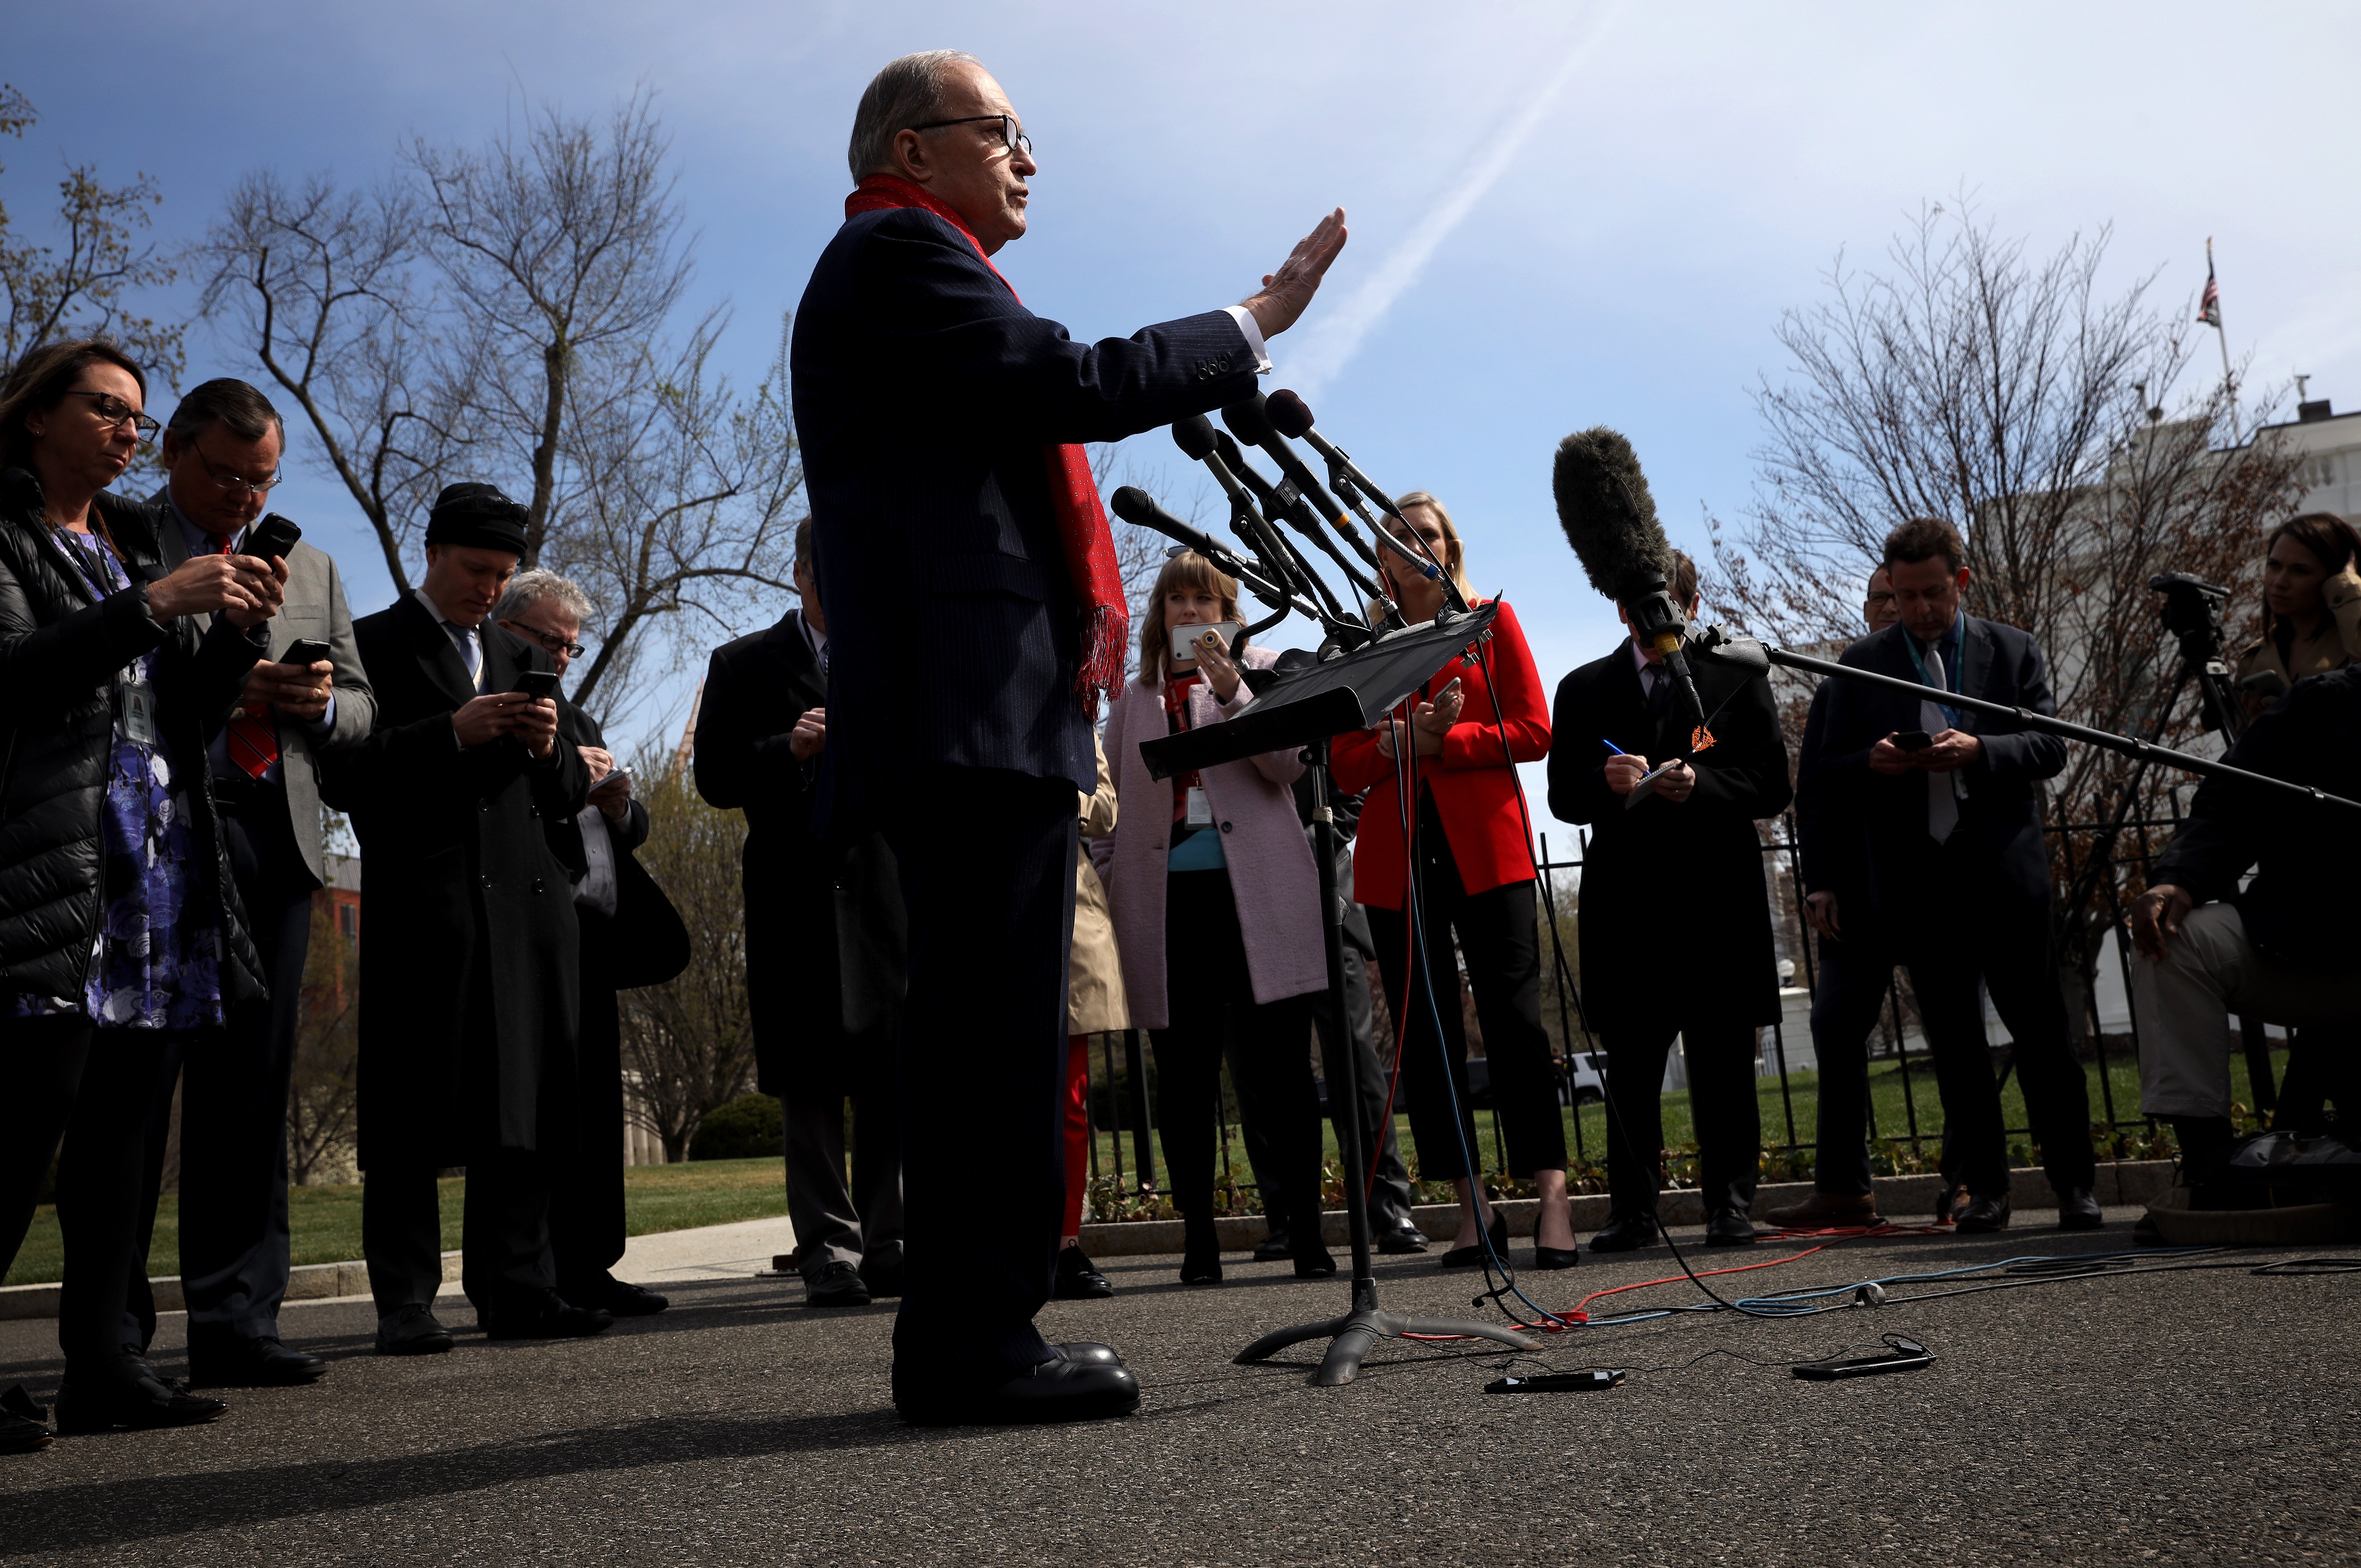 WASHINGTON, DC - MARCH 16: Larry Kudlow, Director of the U.S. National Economic Council, answers questions outside the White House on March 16, 2020 in Washington, DC. U.S. stocks dropped sharply in early trading despite emergency measures by the Federal Reserve to boost the global economy that has been battered due to impacts from the COVID-19 virus. (Photo by Win McNamee/Getty Images)